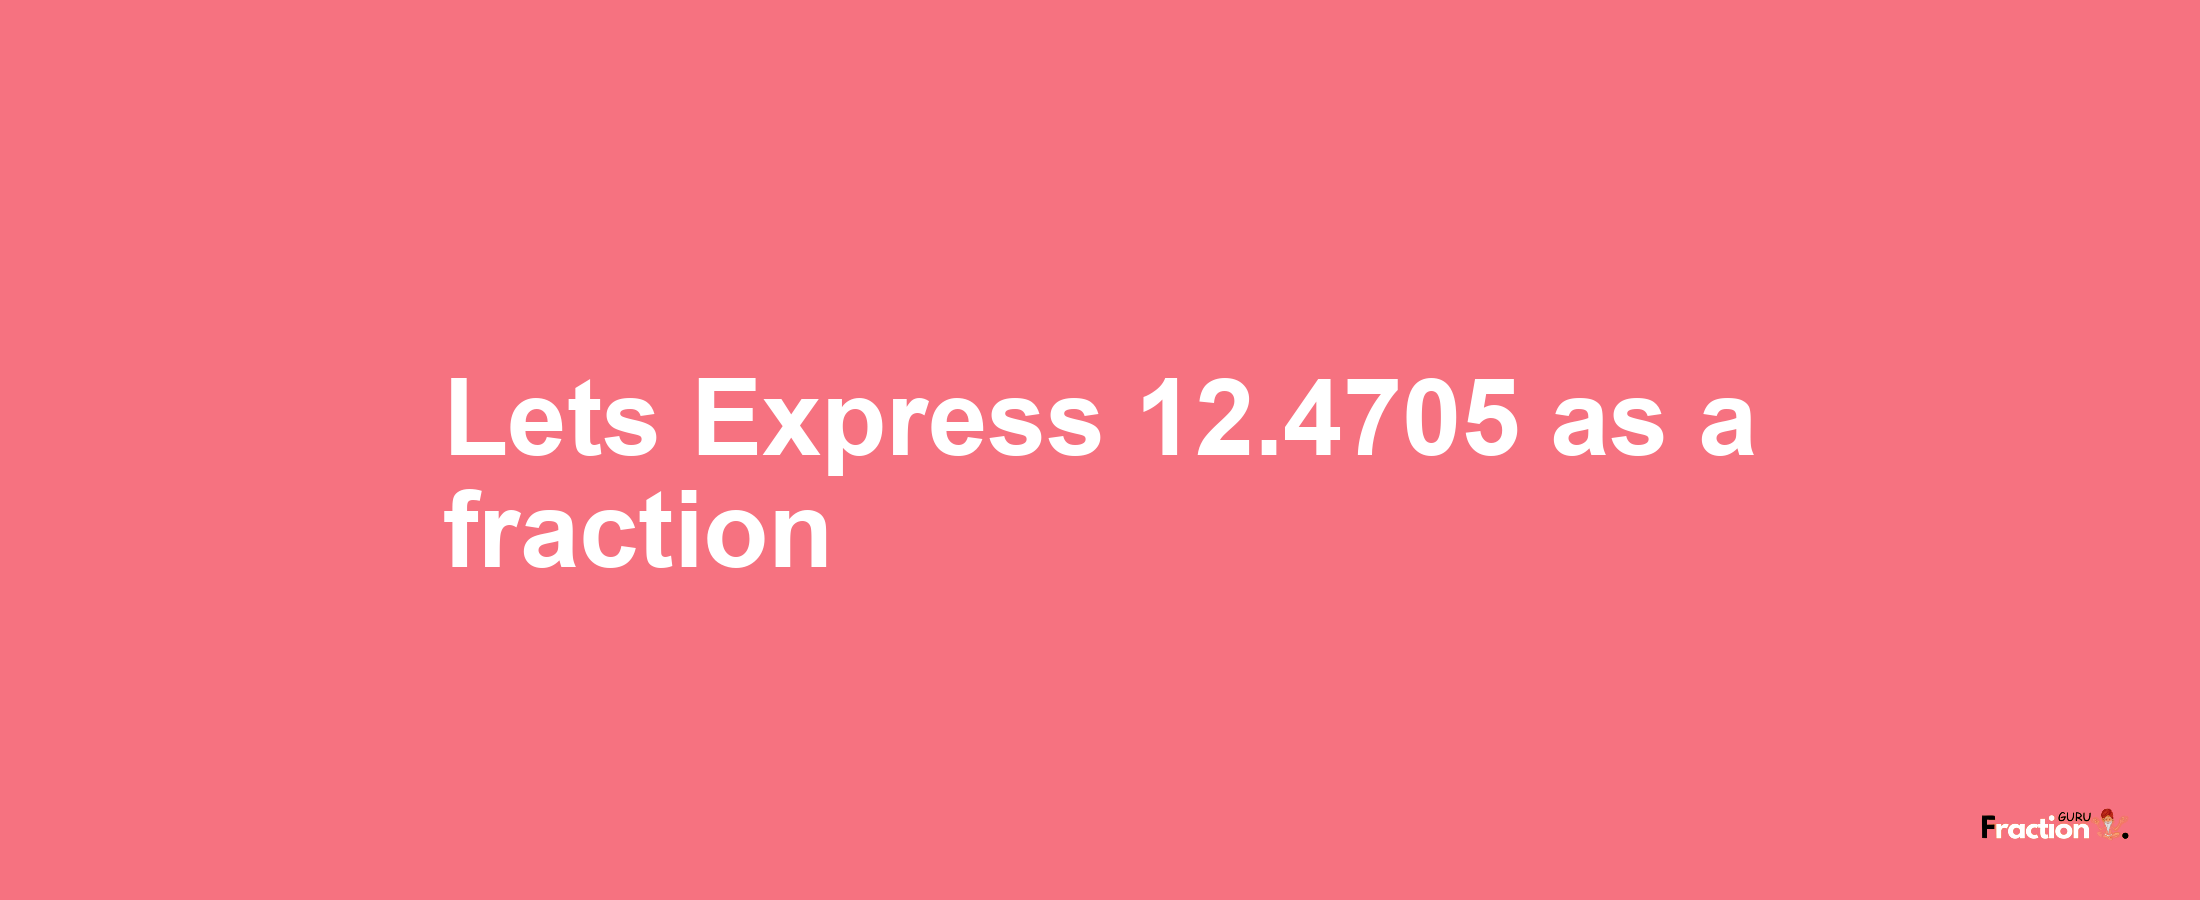 Lets Express 12.4705 as afraction